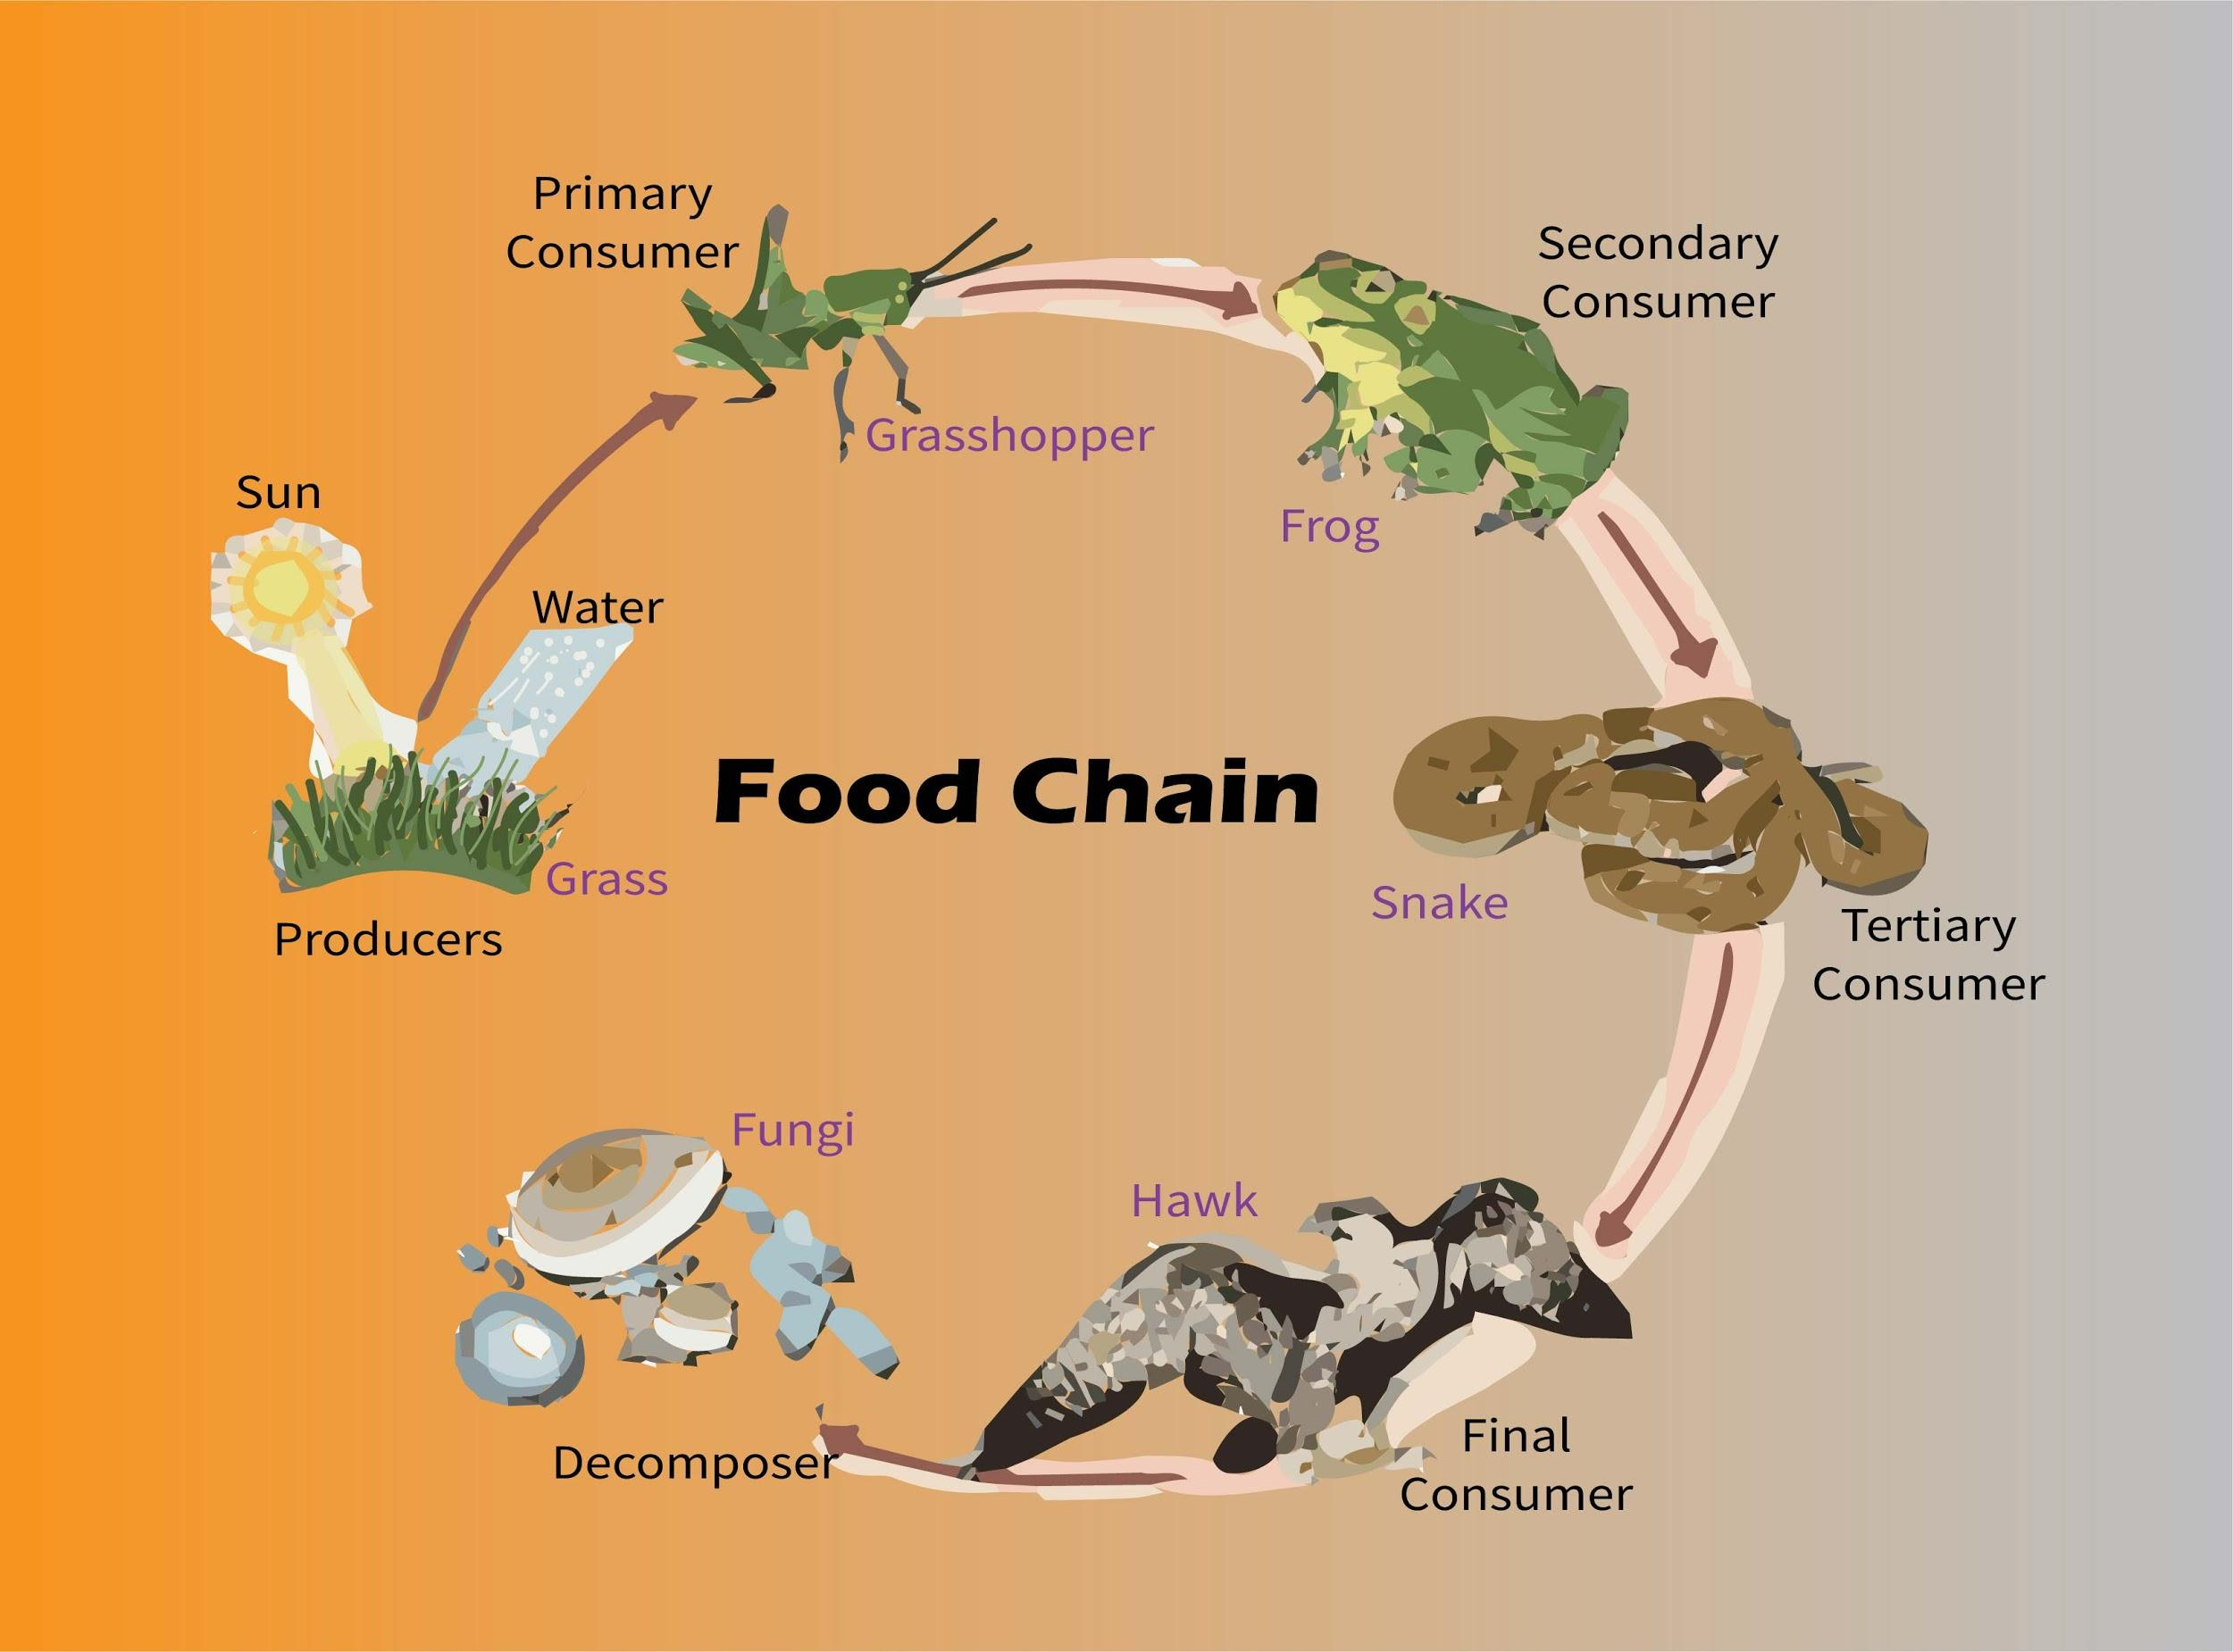 make a food chain with a producer and three consumers